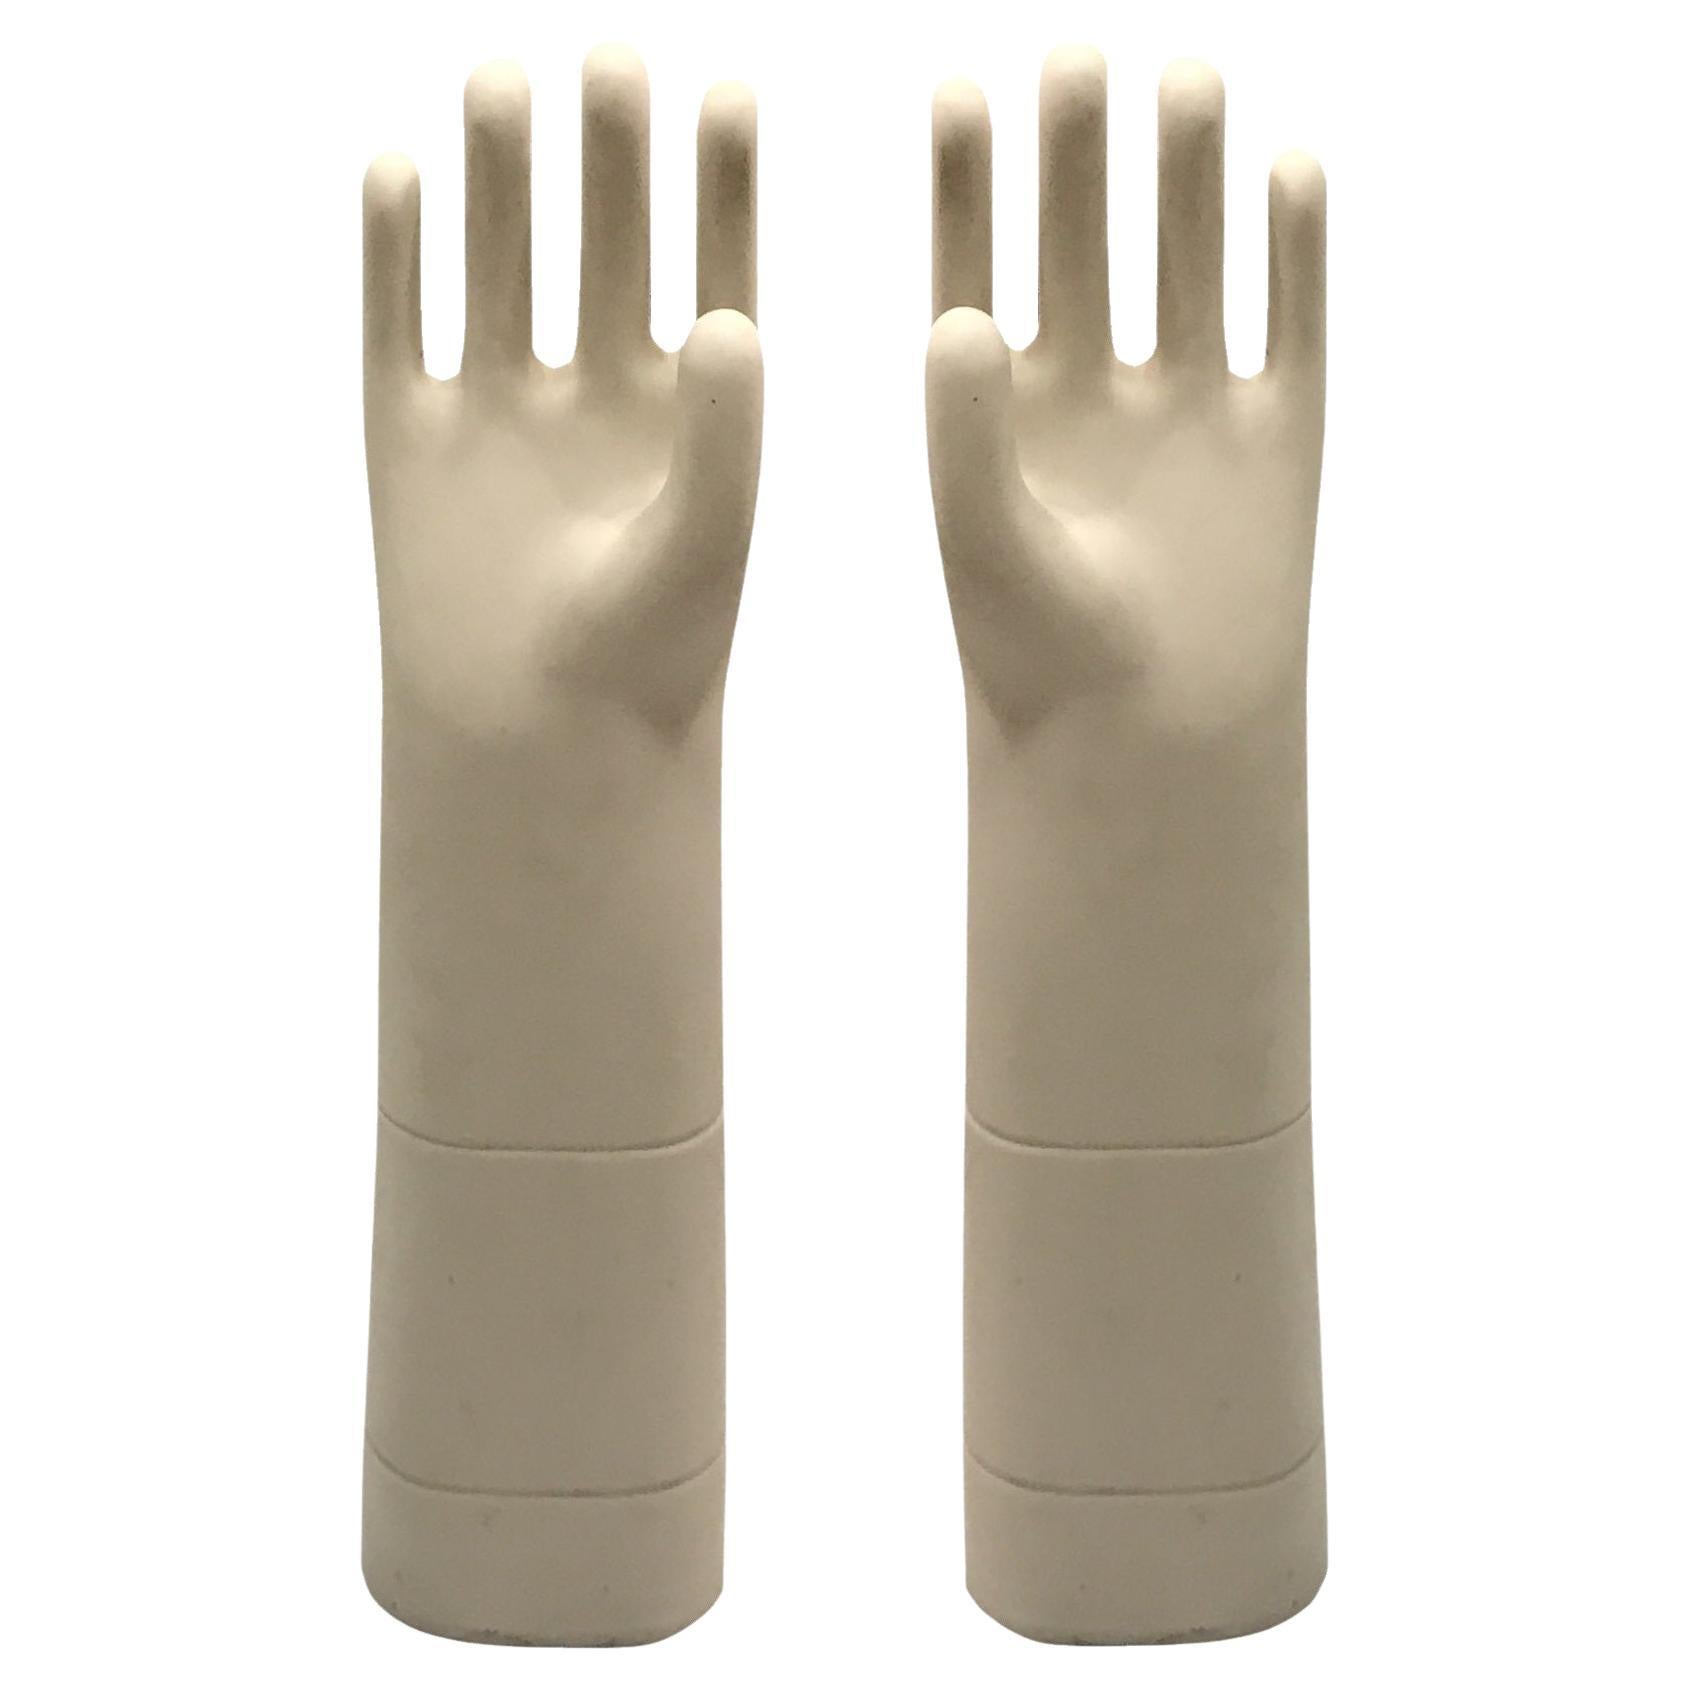 Pair of Hands, they are work glove molds For Sale